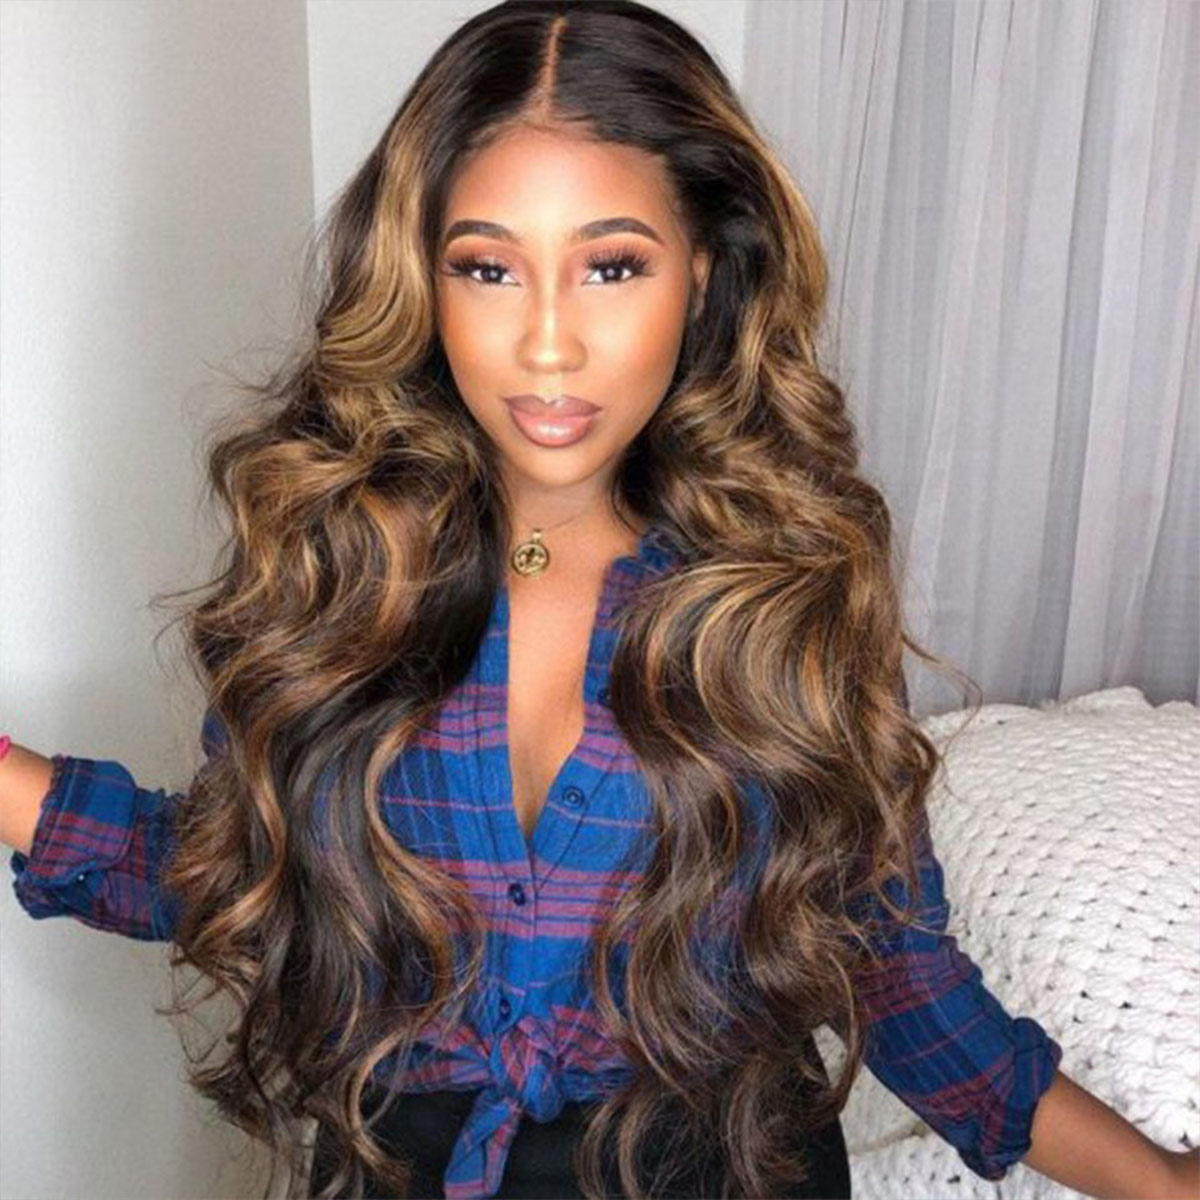 Wear and go pre cut lace wig